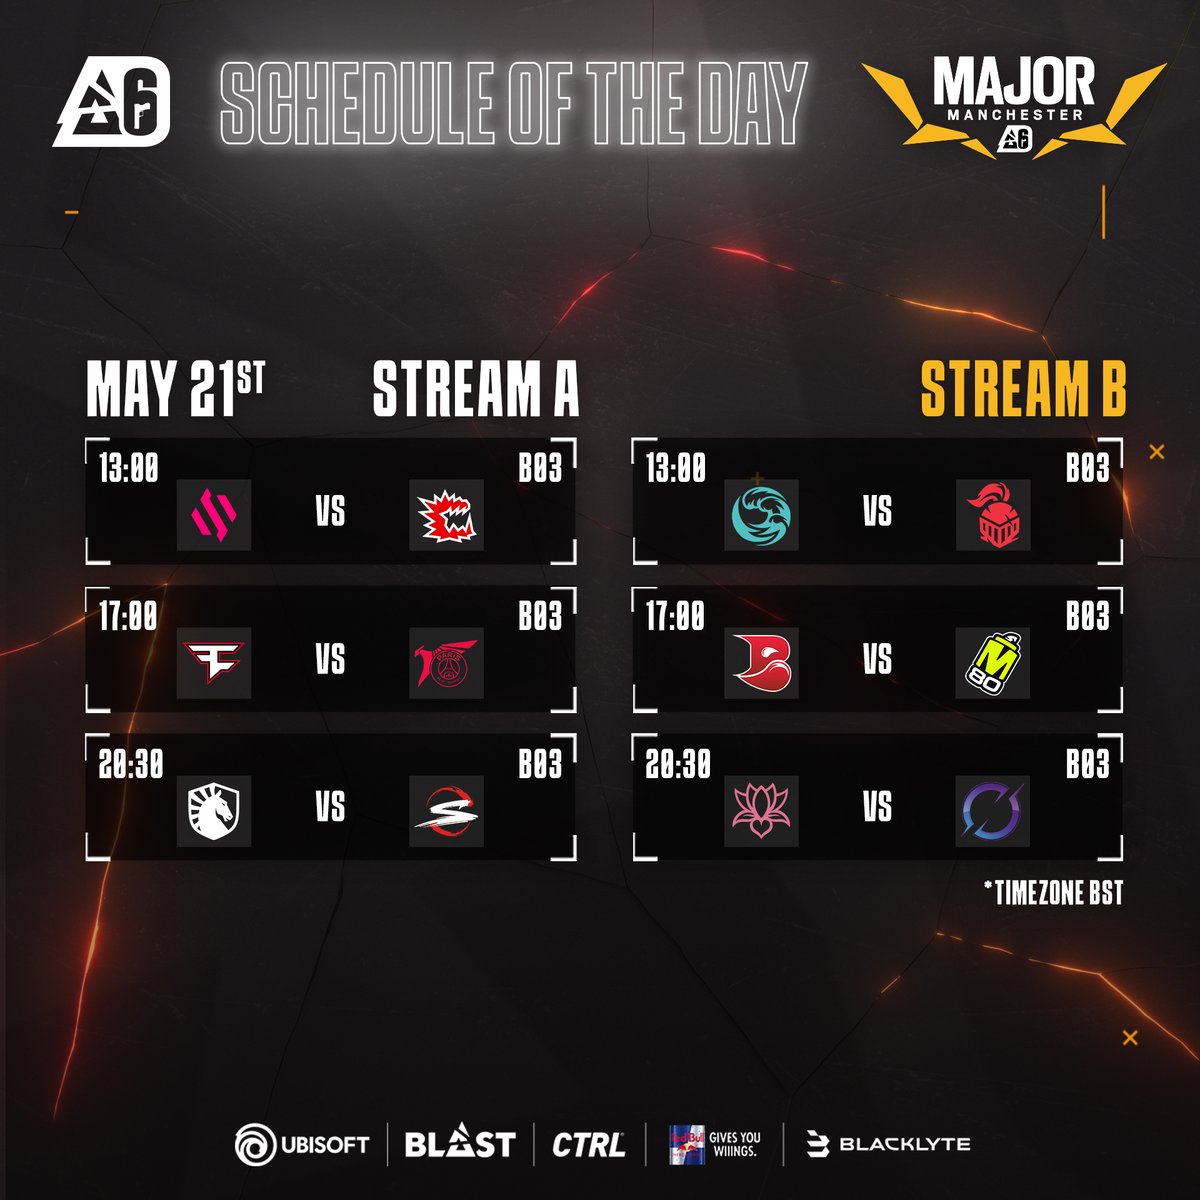 This is getting veeery spicy 🌶️ Check out the schedule for tomorrow's games here! #BLASTR6Major 🇬🇧